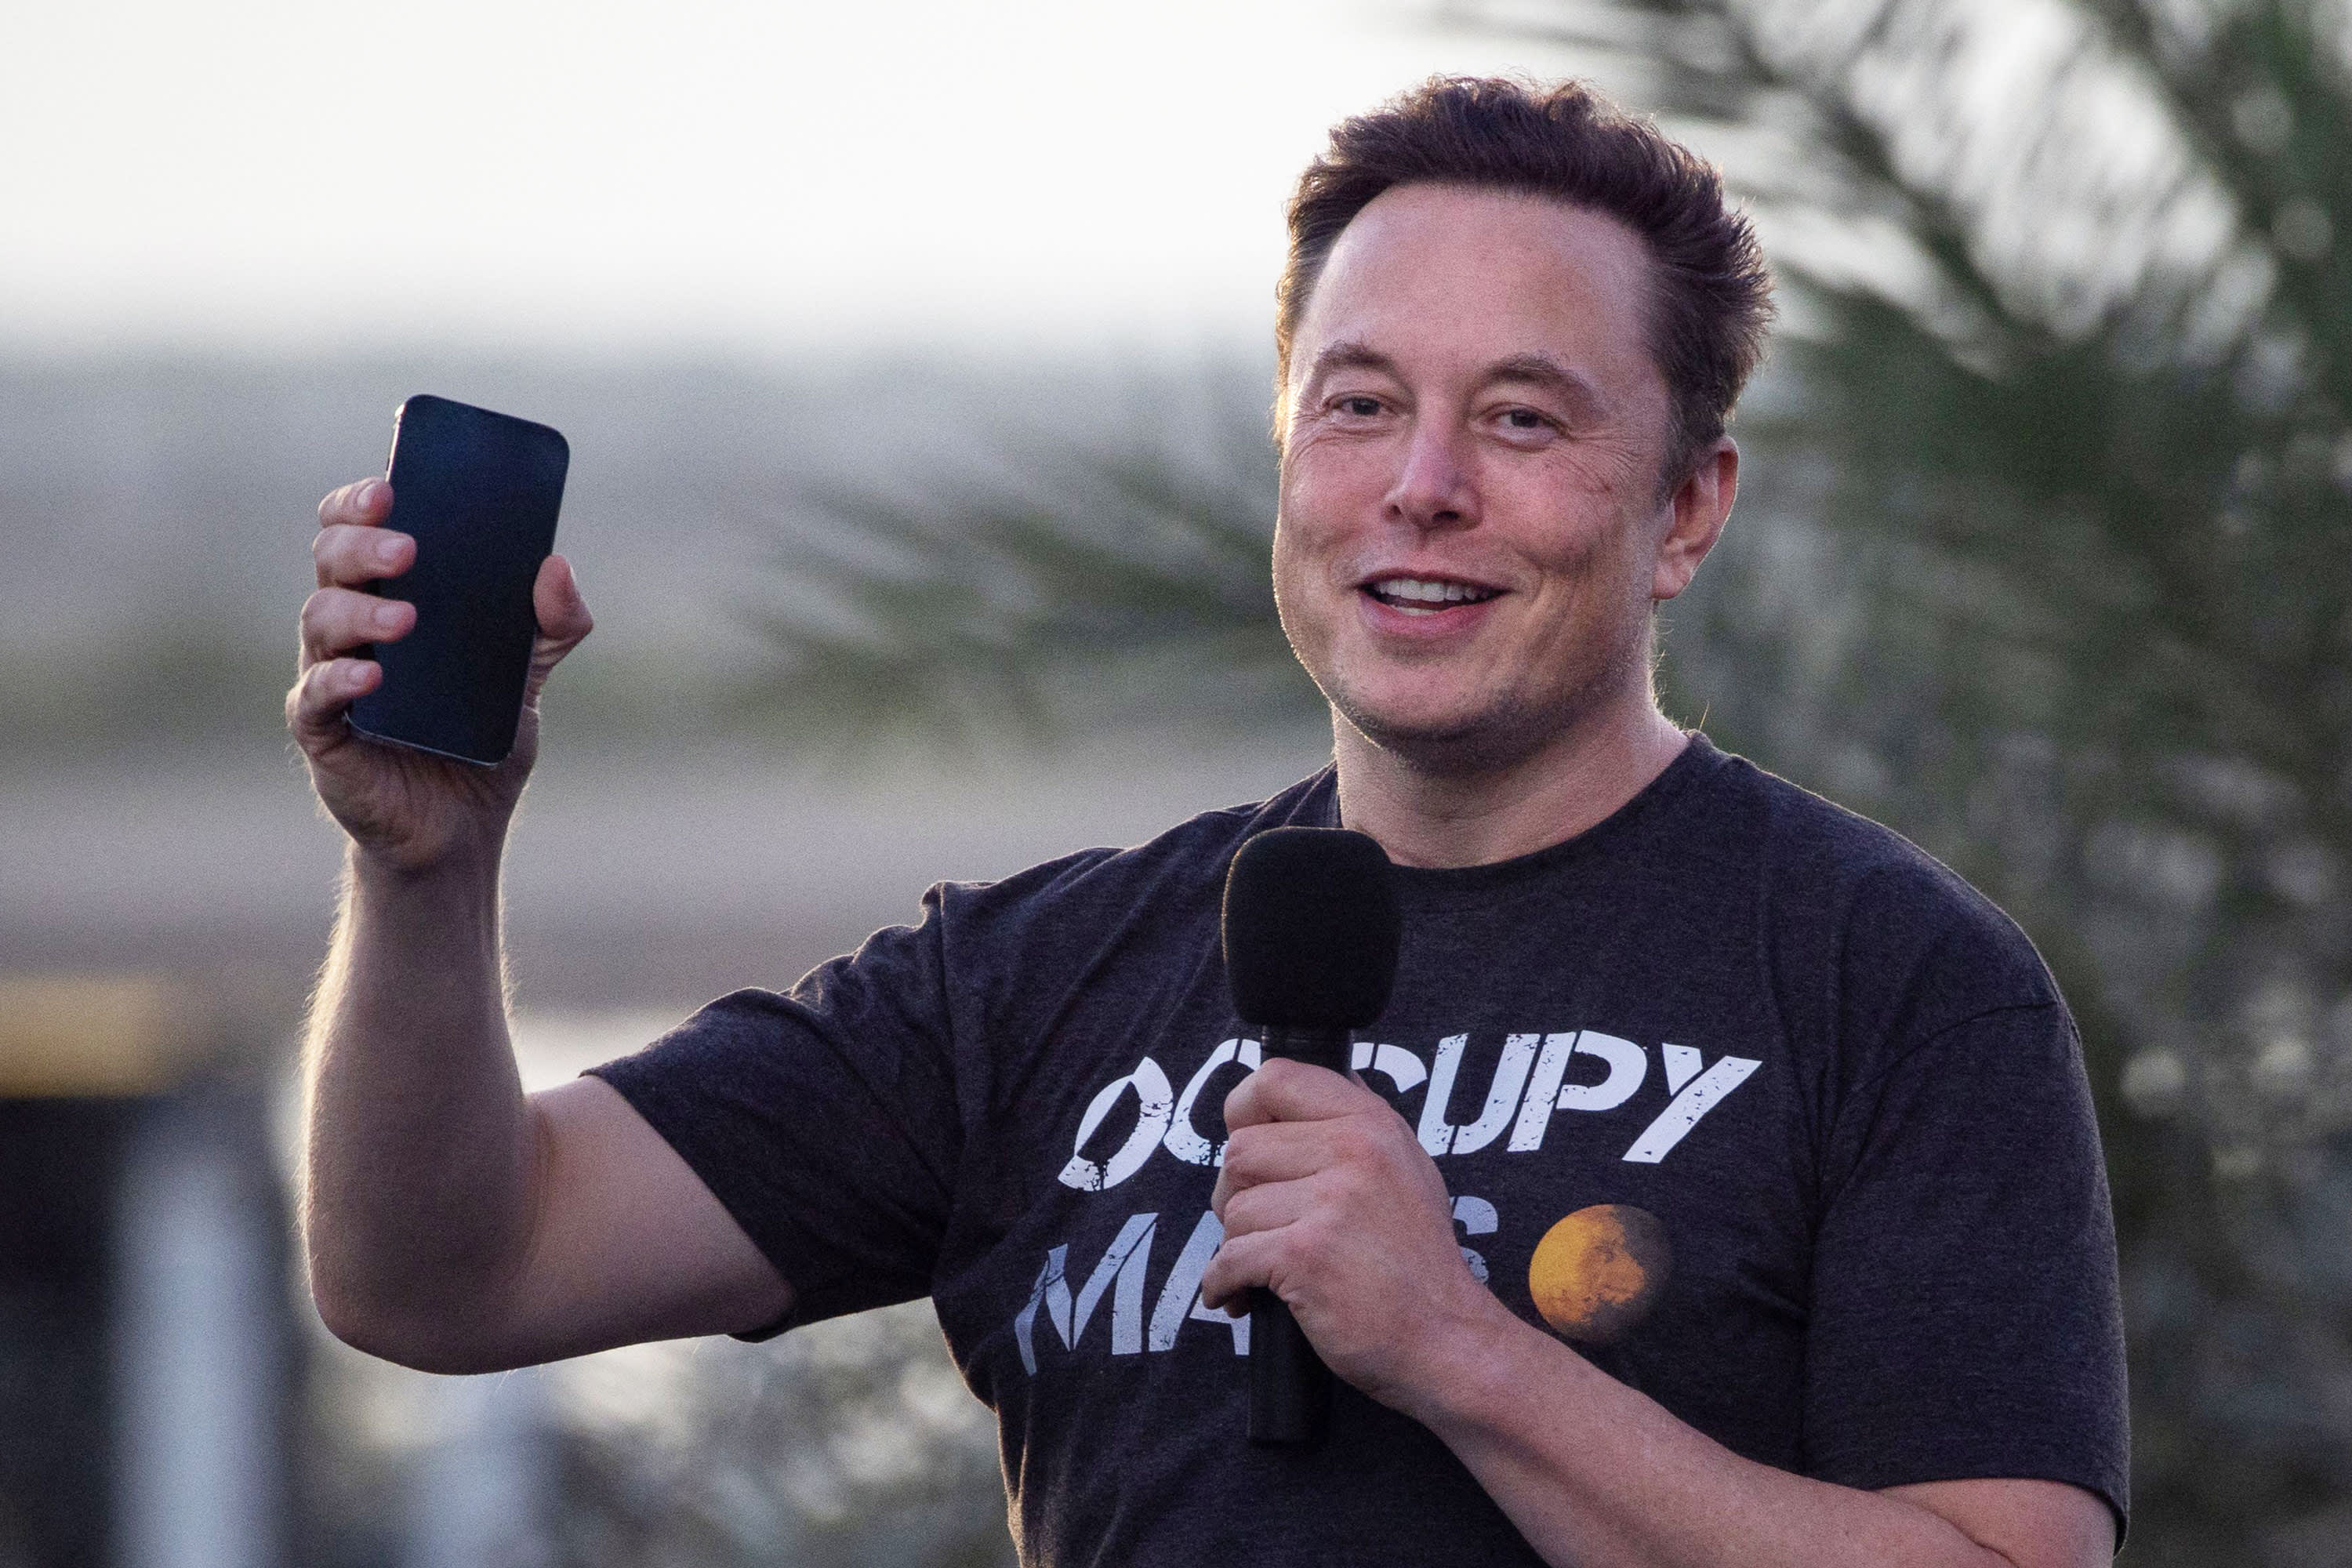 Tesla's stock is suffering from Musk's Twitter takeover, Morgan Stanley survey of investors finds